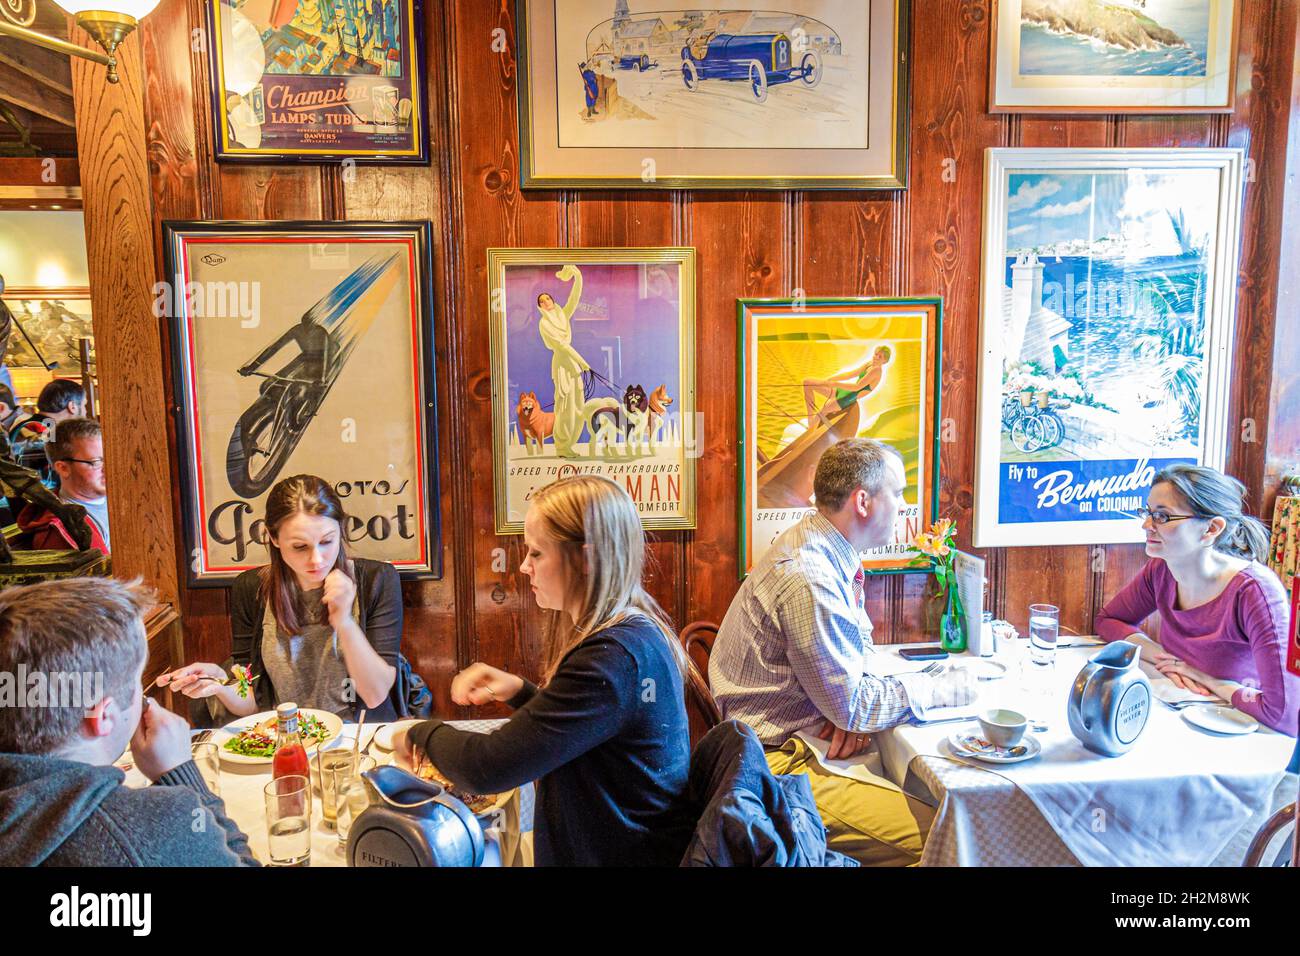 Washington DC,M Street,Clyde's of Georgetown restaurant inside interior,man male woman female women couple dining tables eating Stock Photo